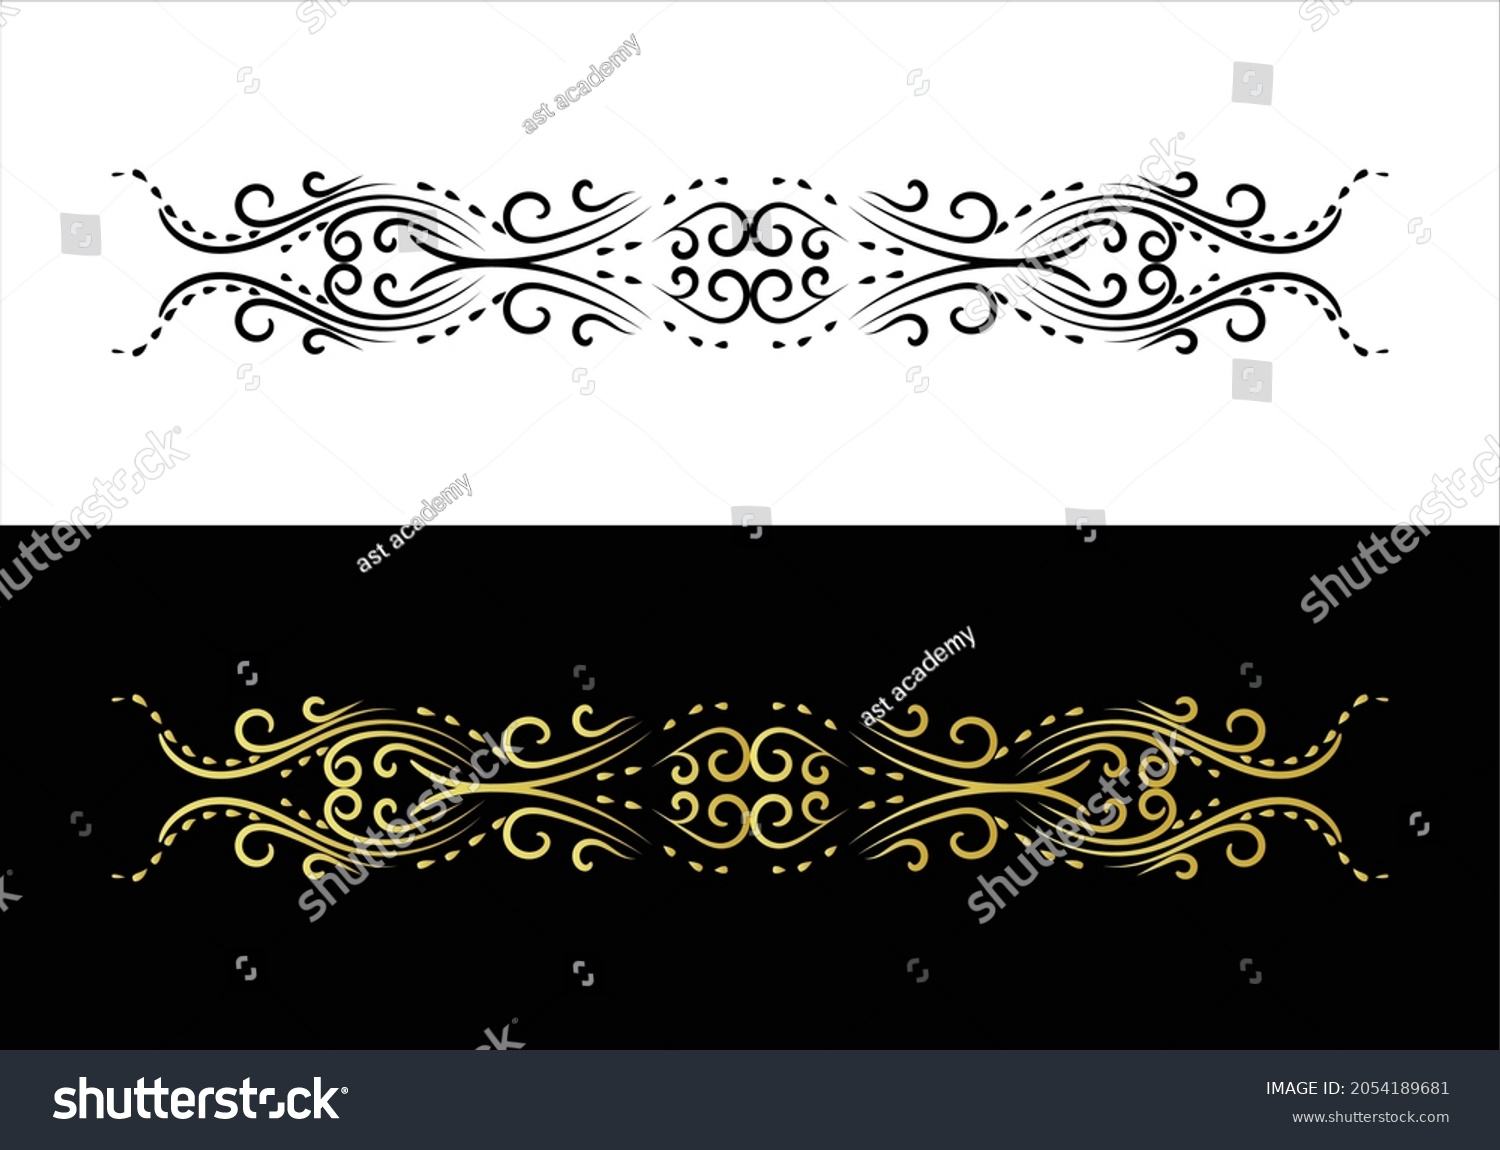 SVG of Floral cut file with space in the meddle, Filigree ornate page borders. Decorative scroll frame svg